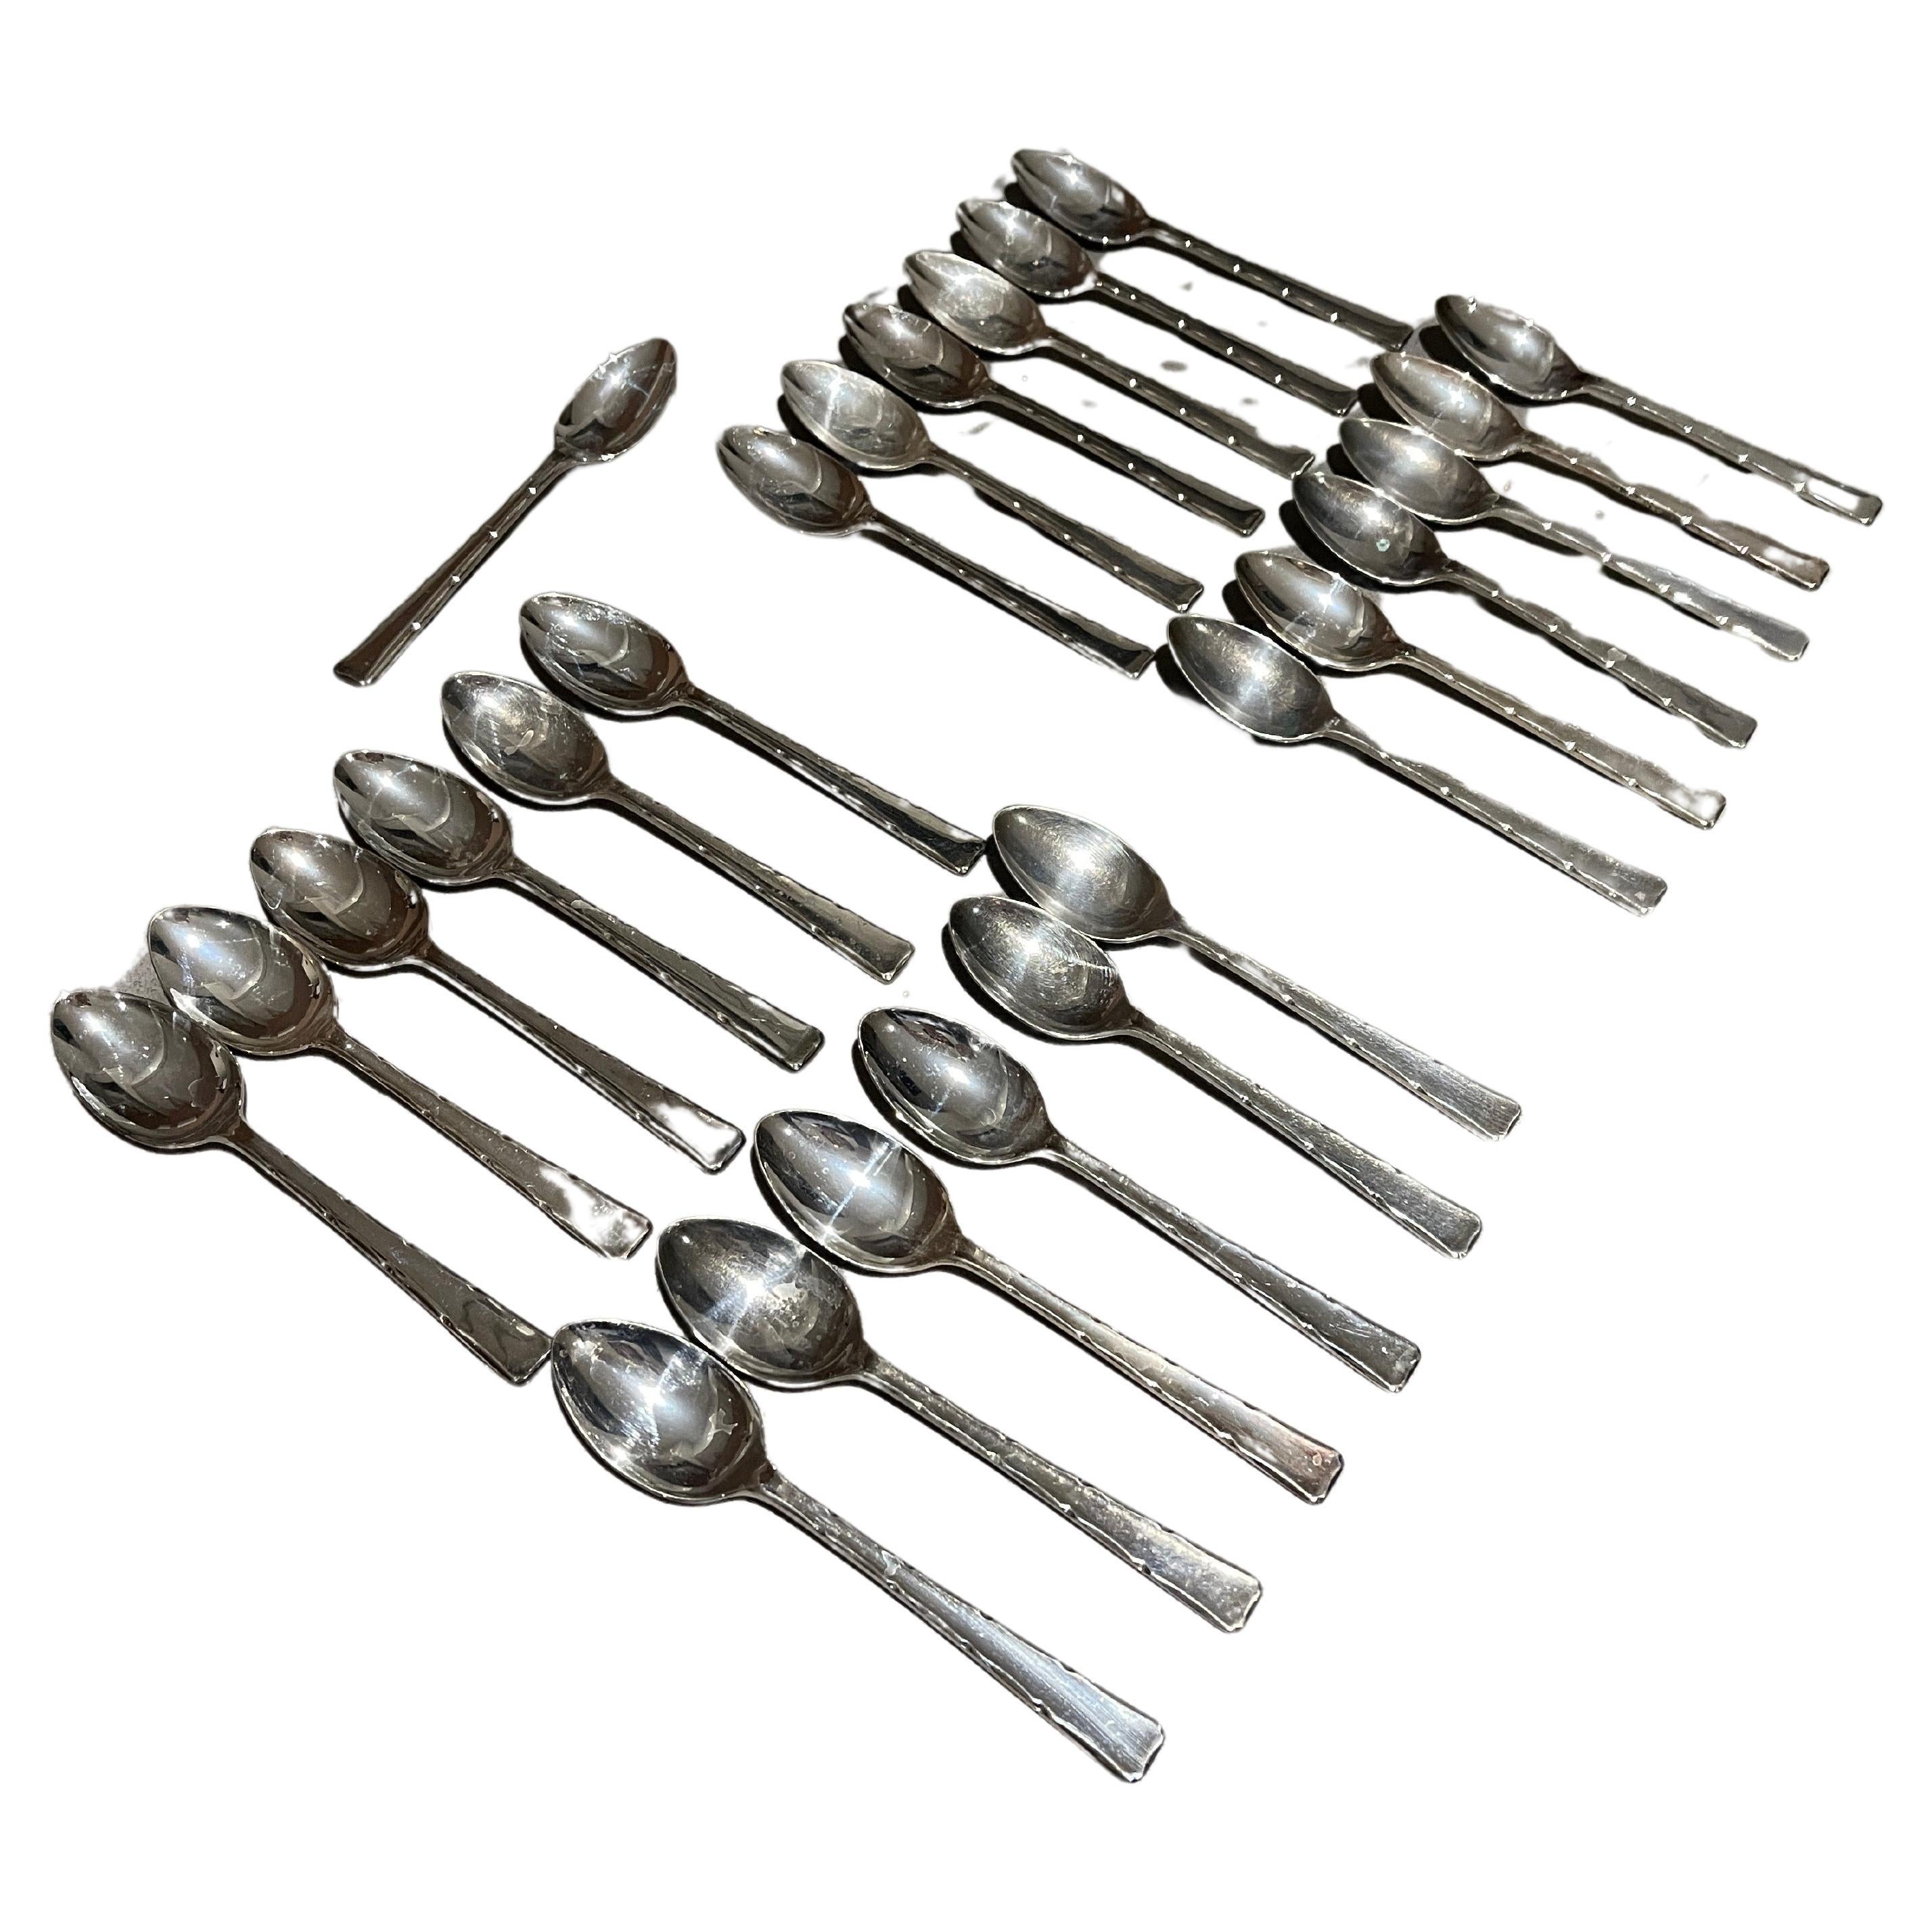 25 Antique Spoon English Silver Demitasse Coffee Tea Spoons 4 Set of 6 For Sale